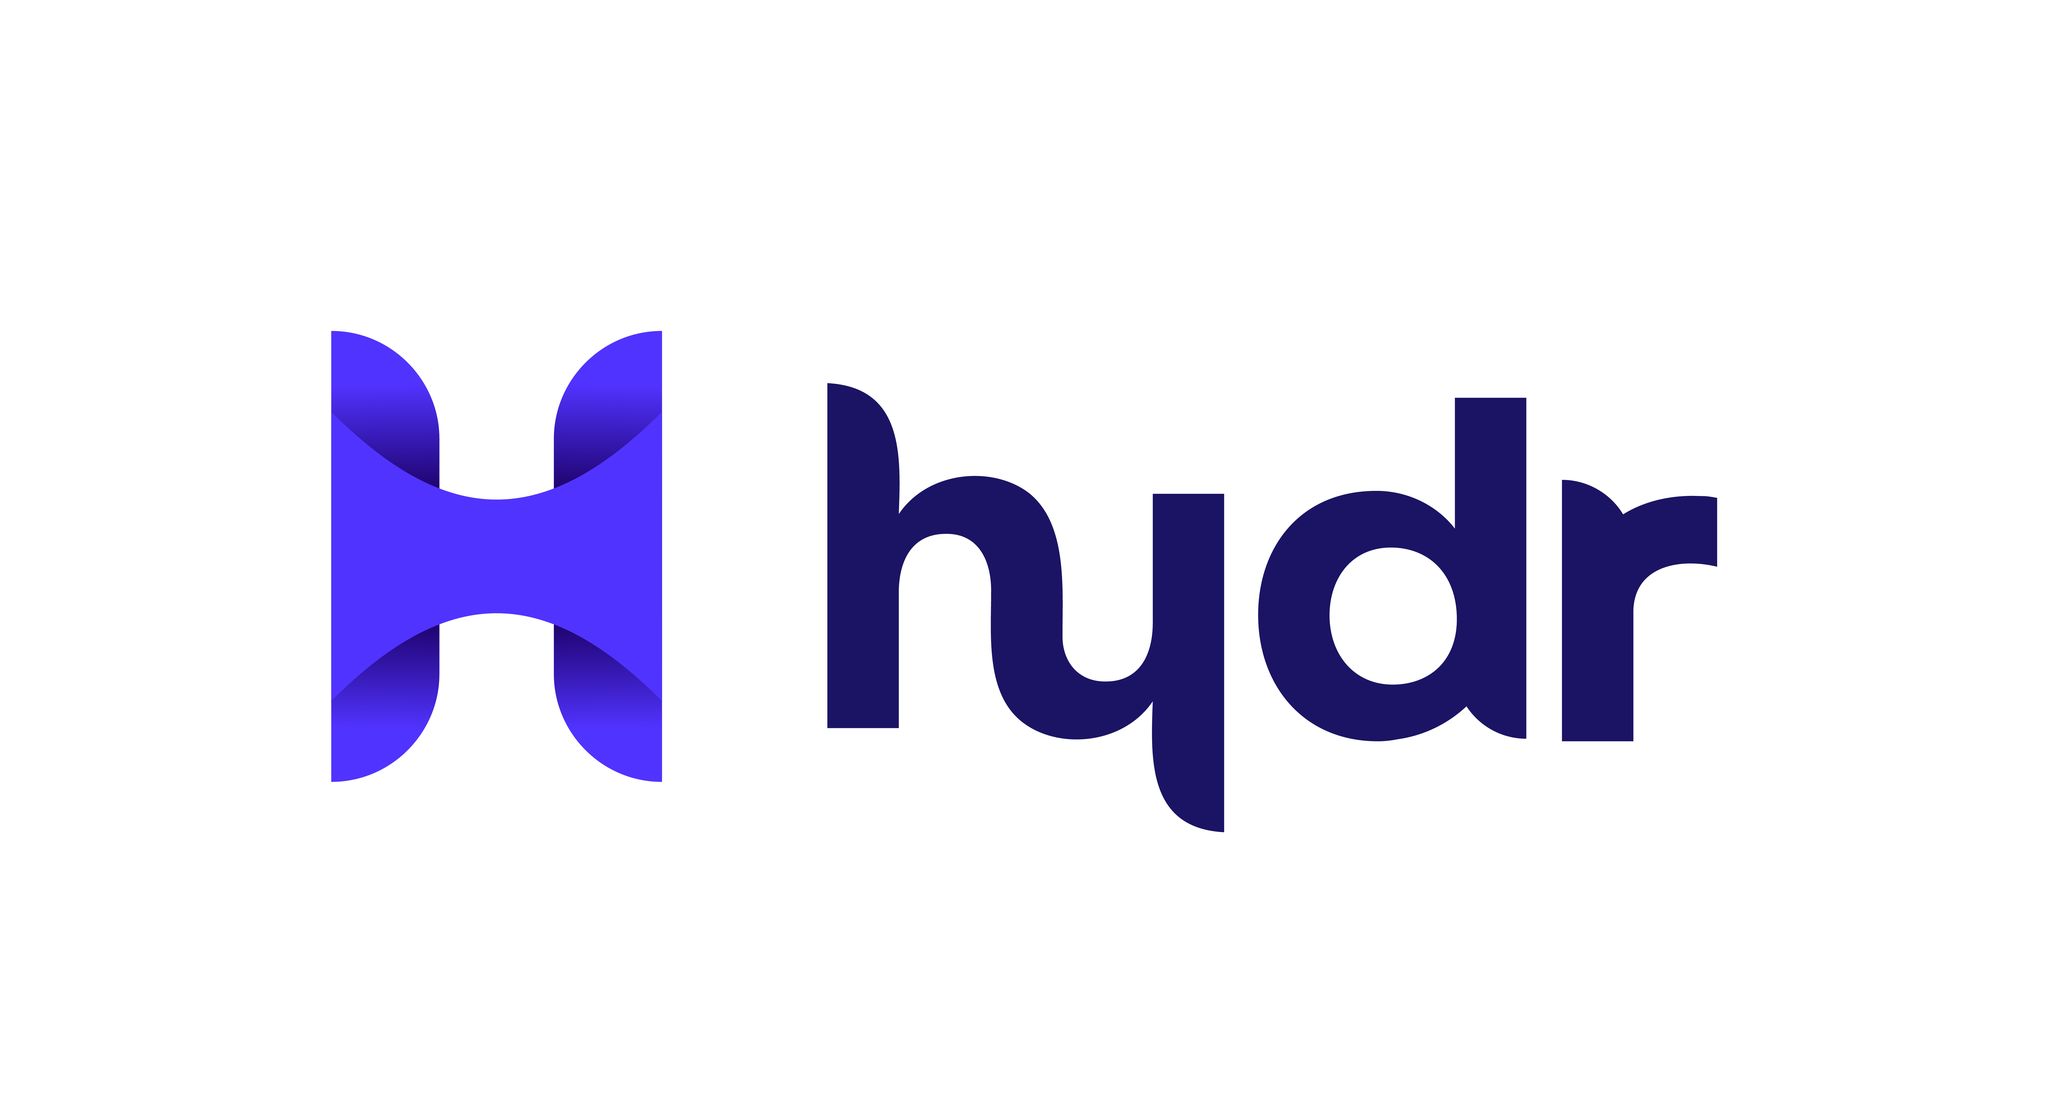 Manchester start-up Hydr develops invoice finance platform to integrate with major cloud accounting software providers